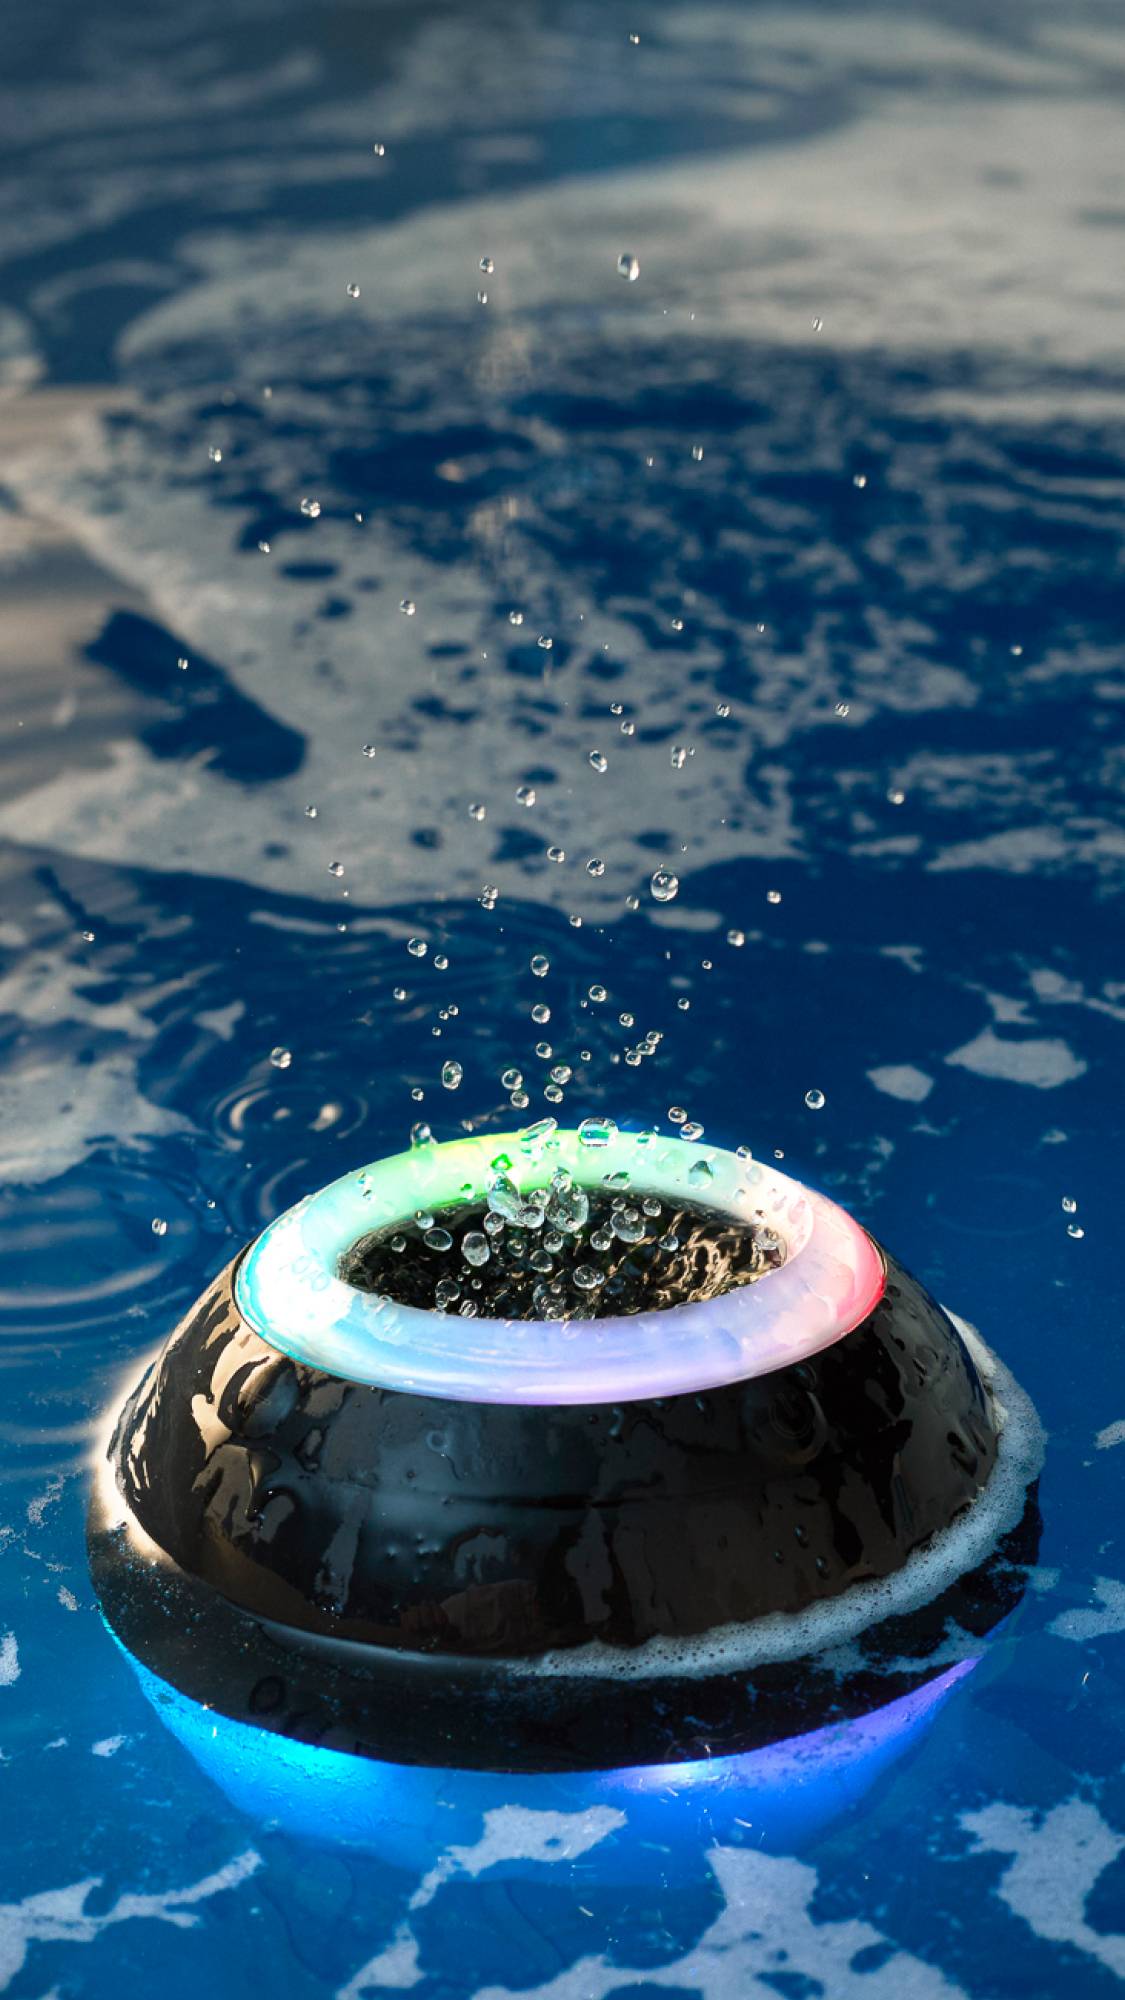 The black Bath Bot is lying in clear, deep blue waters. The upper ring light is illuminated rainbow as a puddle of water splashes from the speaker vibrations on top.